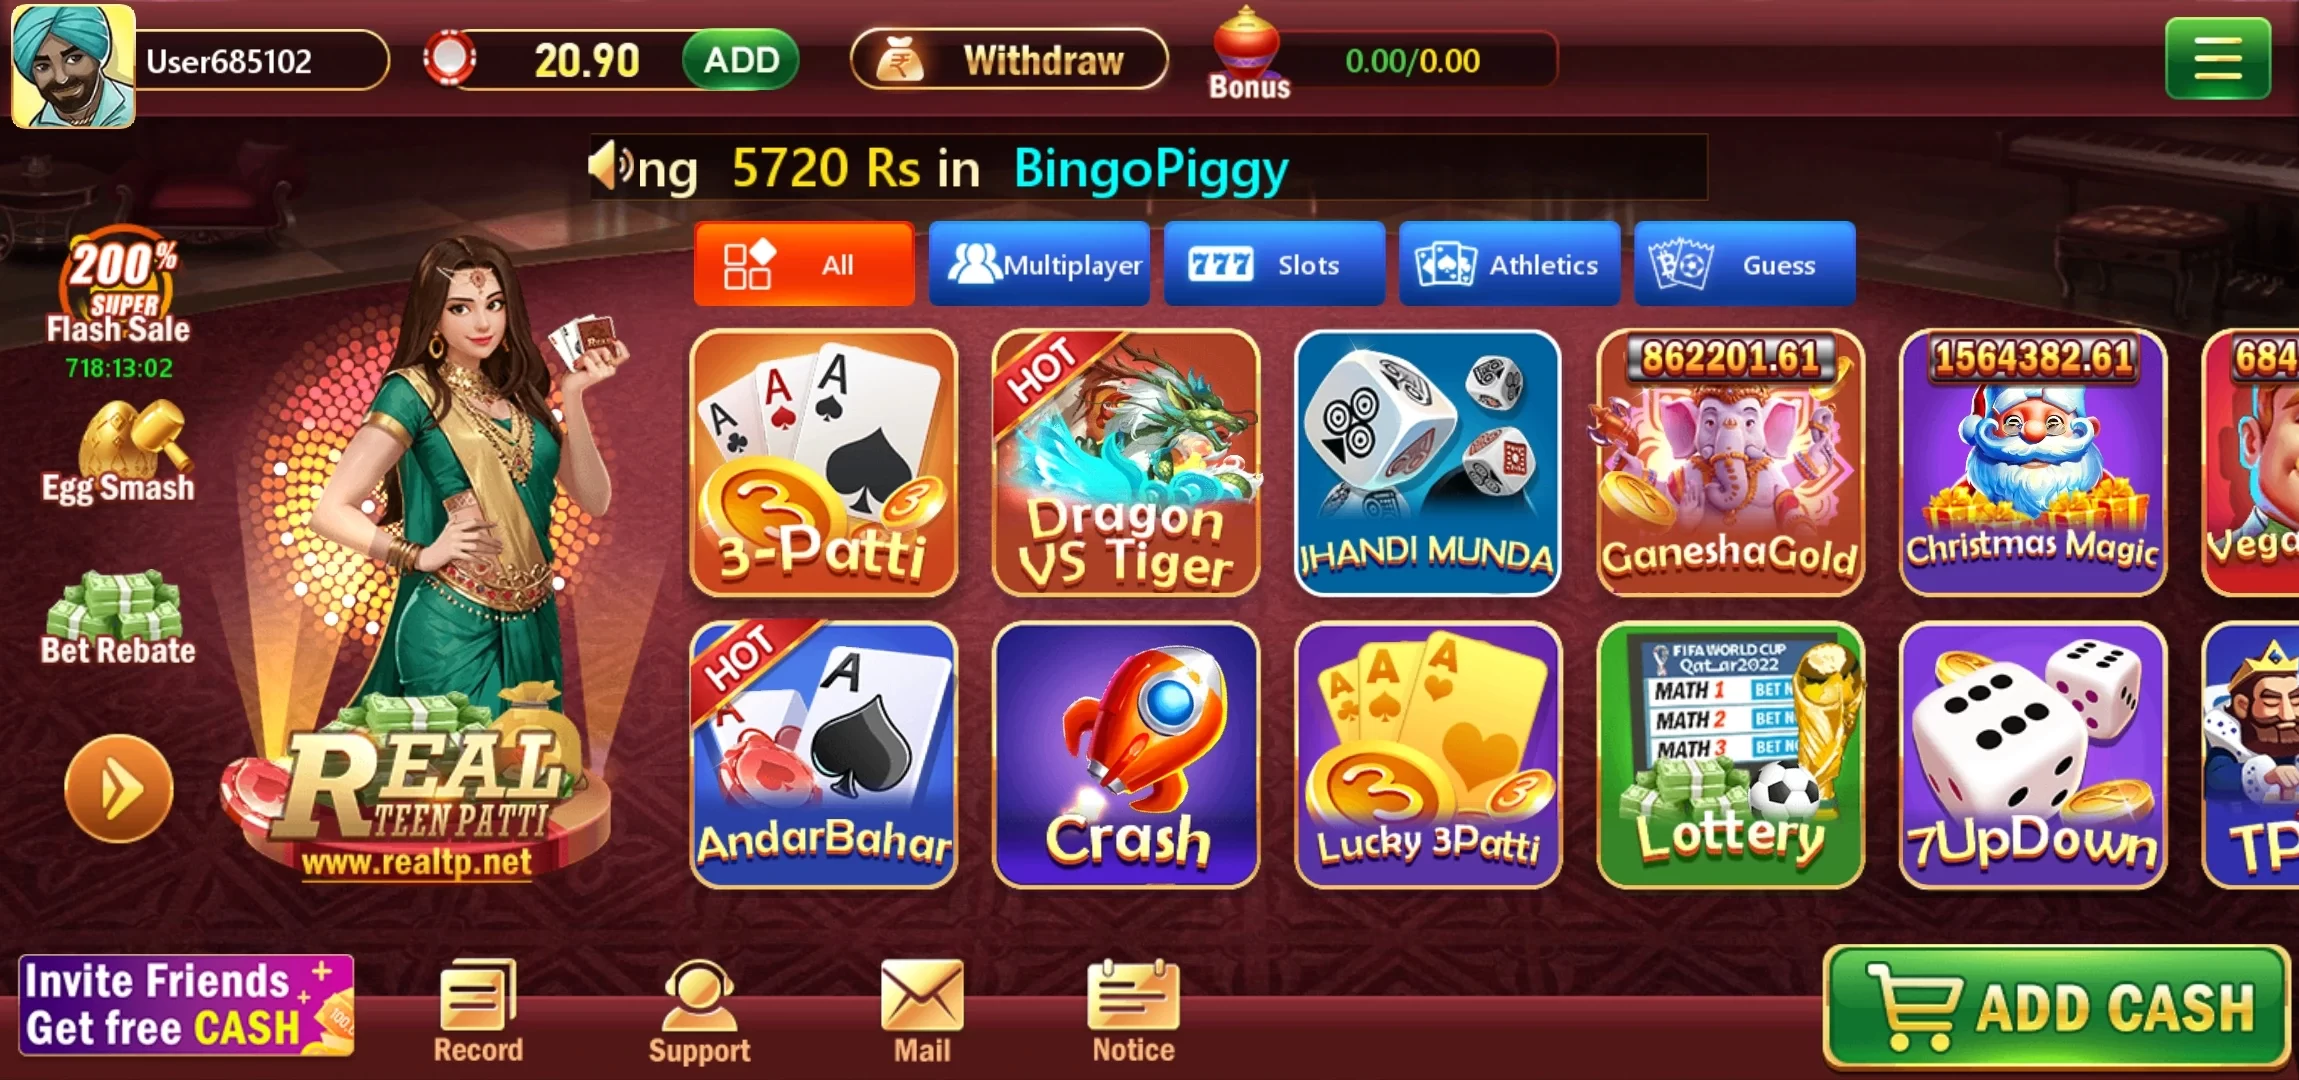 Games Available on Real Teen Patti App